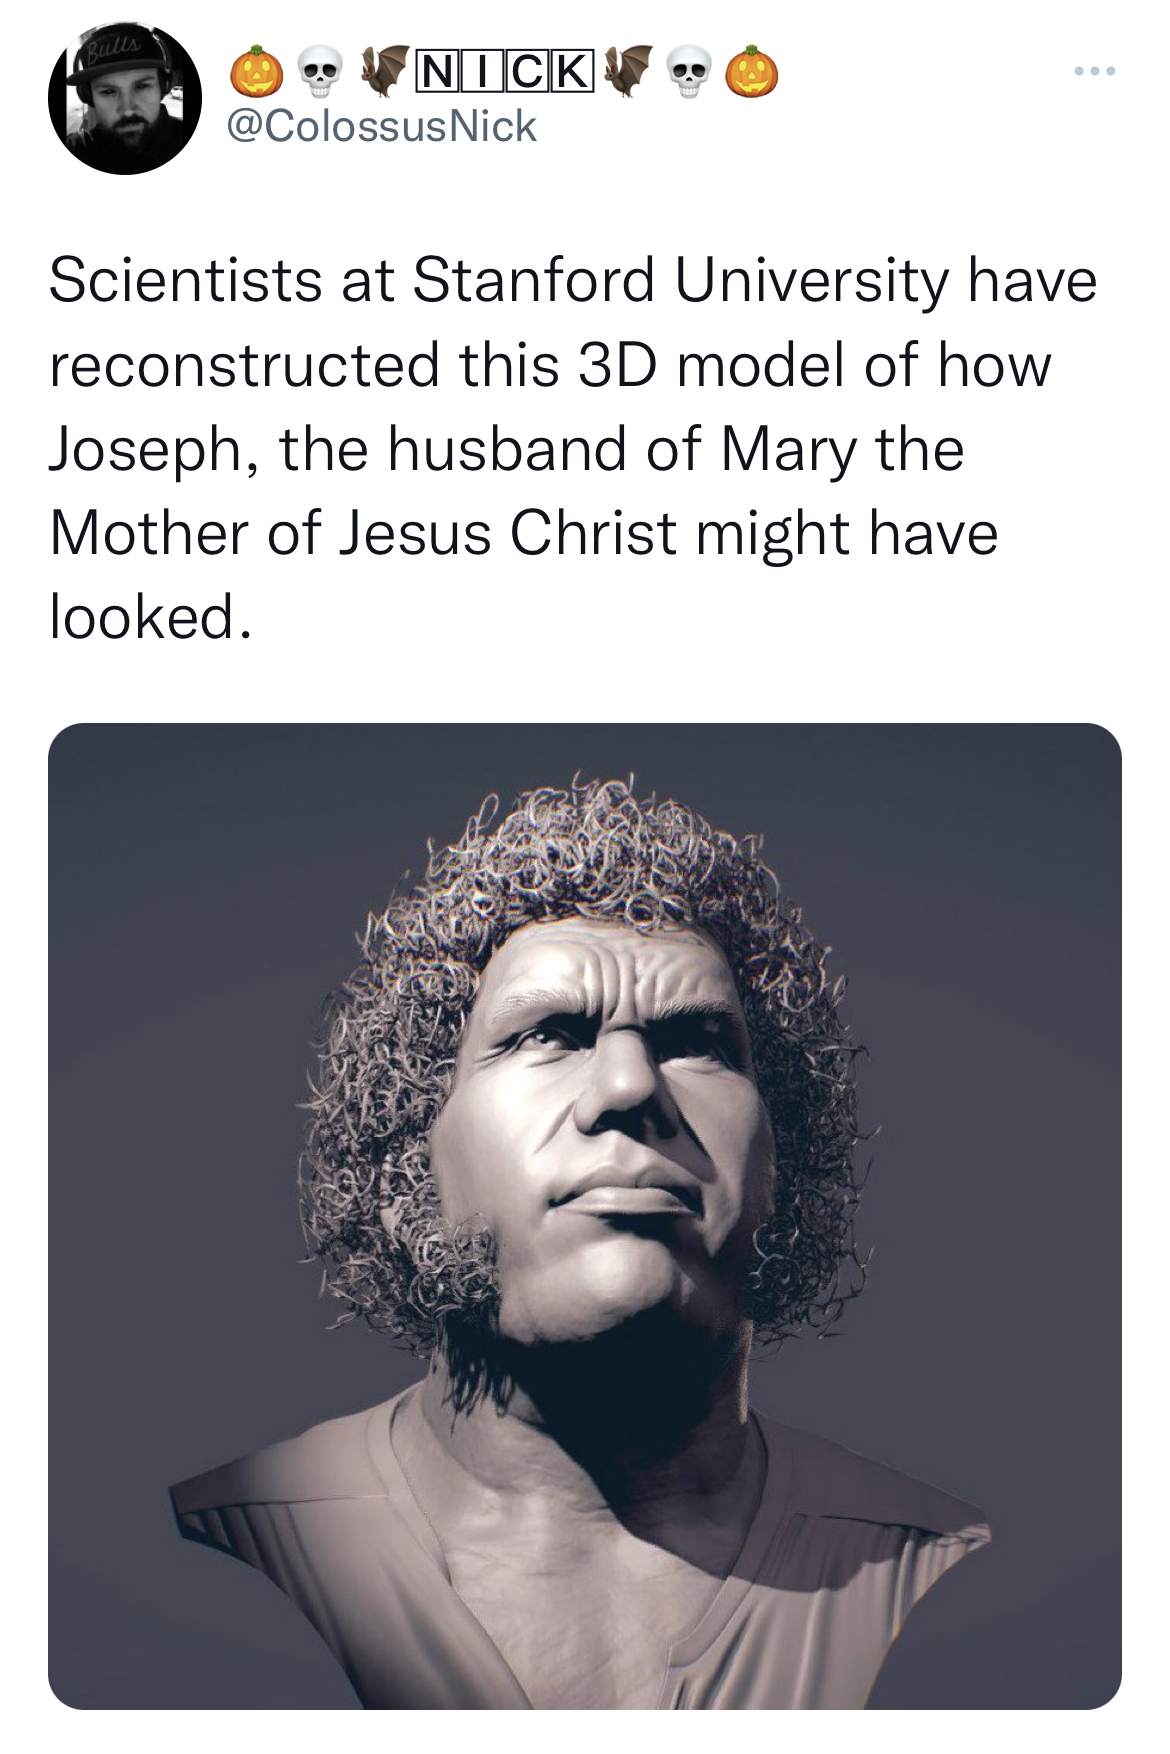 Tweets roasting celebs - head - Nick Scientists at Stanford University have reconstructed this 3D model of how Joseph, the husband of Mary the Mother of Jesus Christ might have looked.